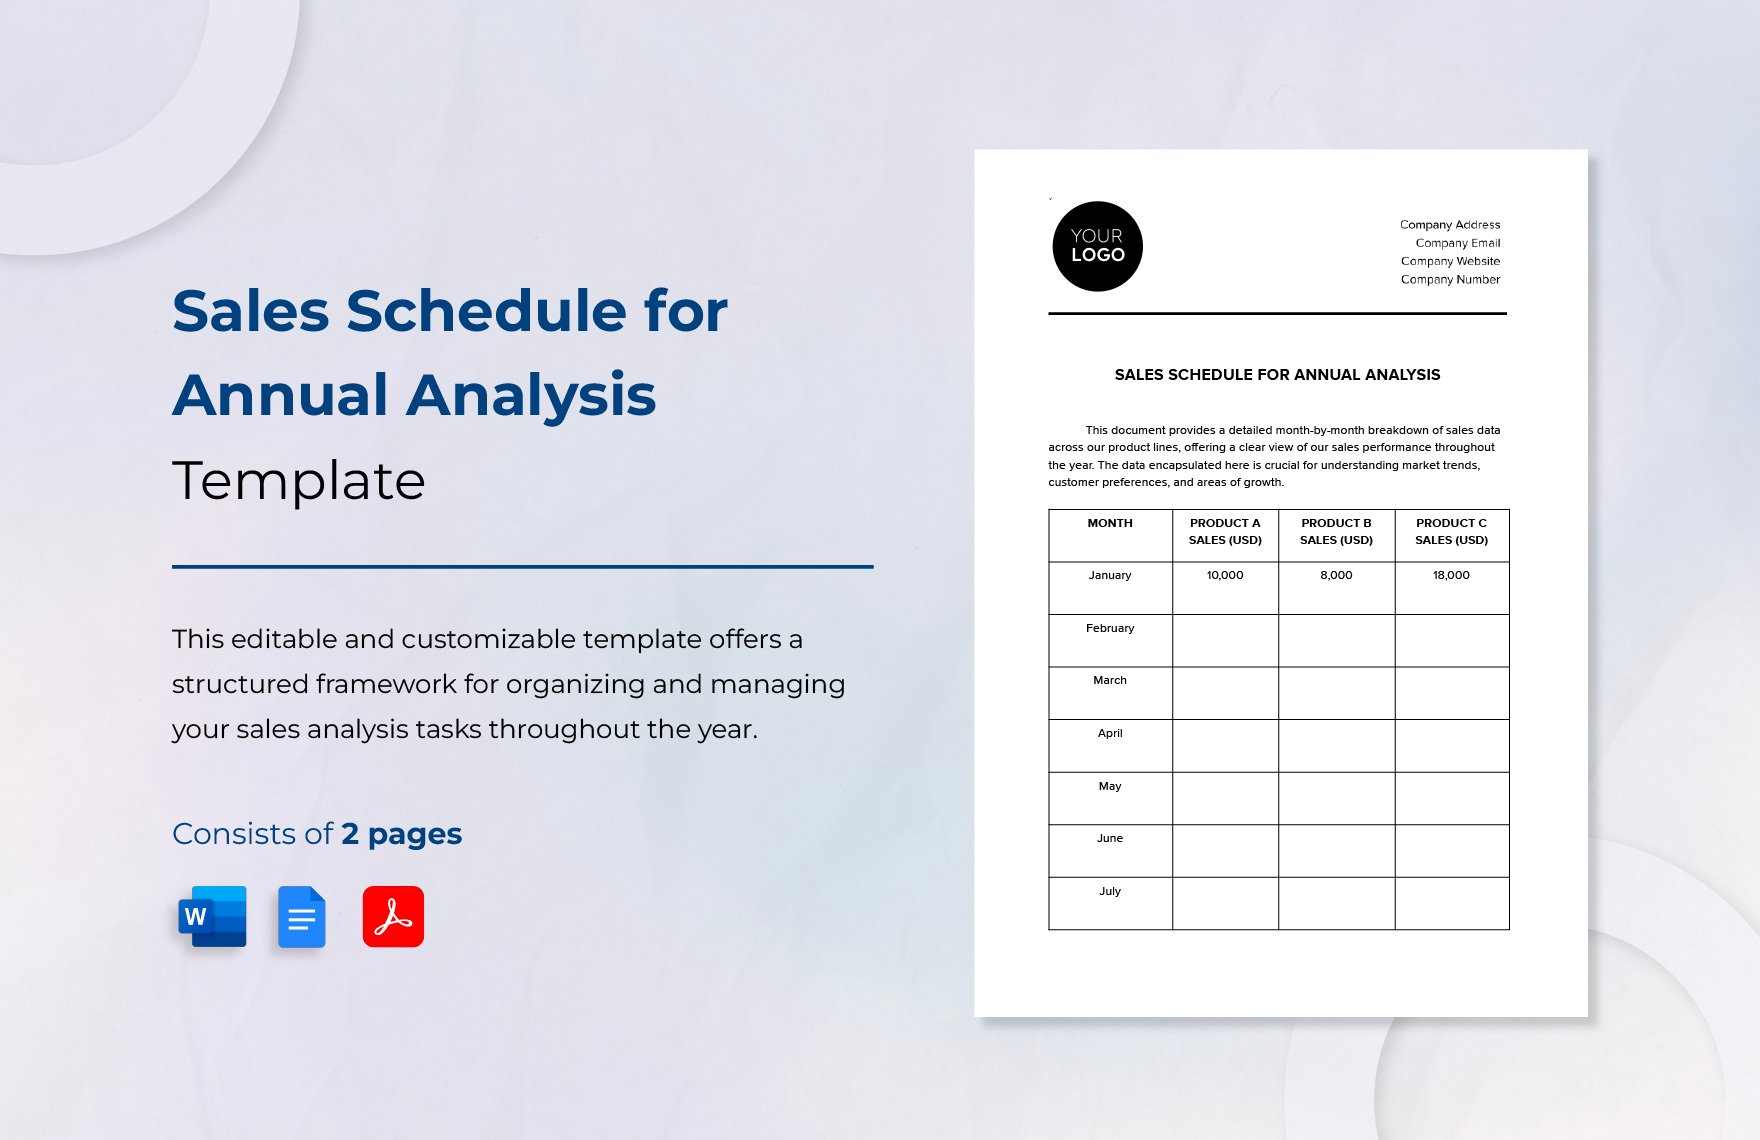 Sales Schedule for Annual Analysis Template in Word, Google Docs, PDF